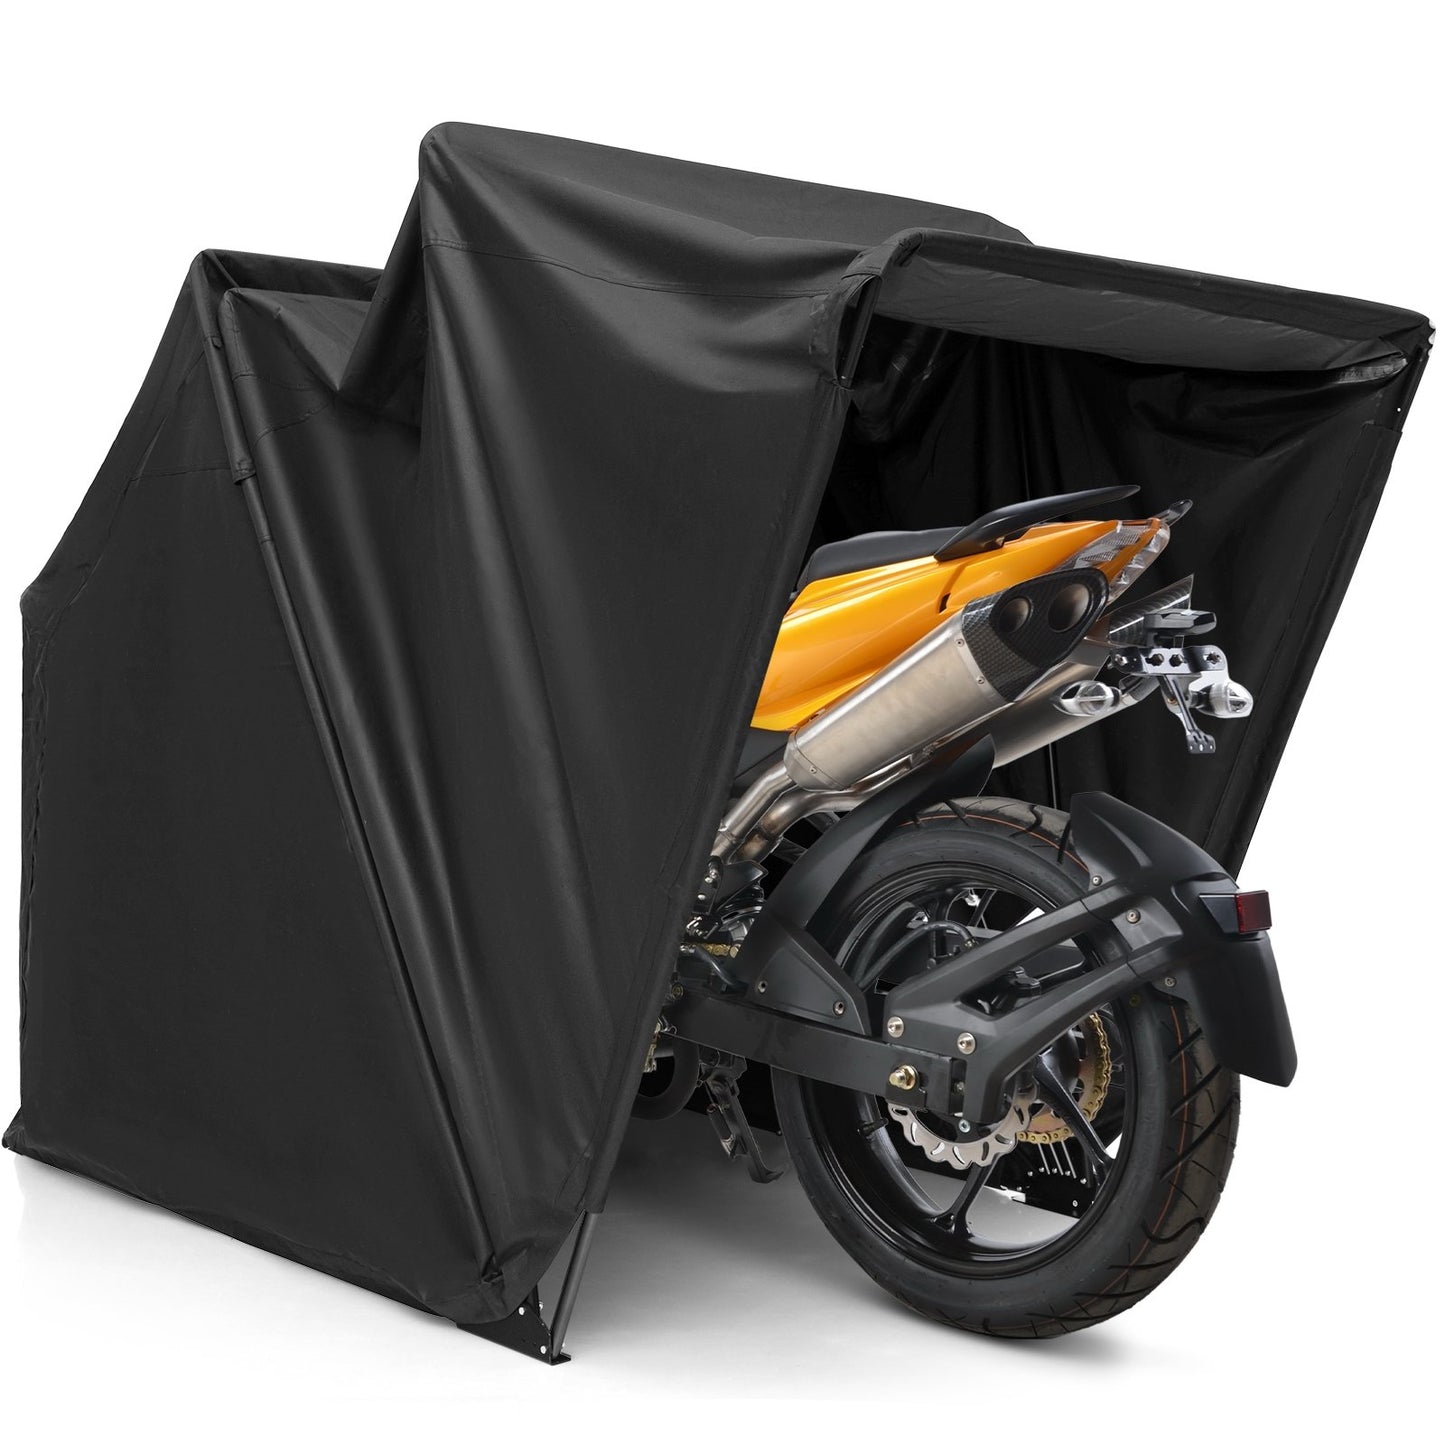 Outdoor Motorcycle Shelter Waterproof Motorbike Storage Tent with Cover, Black